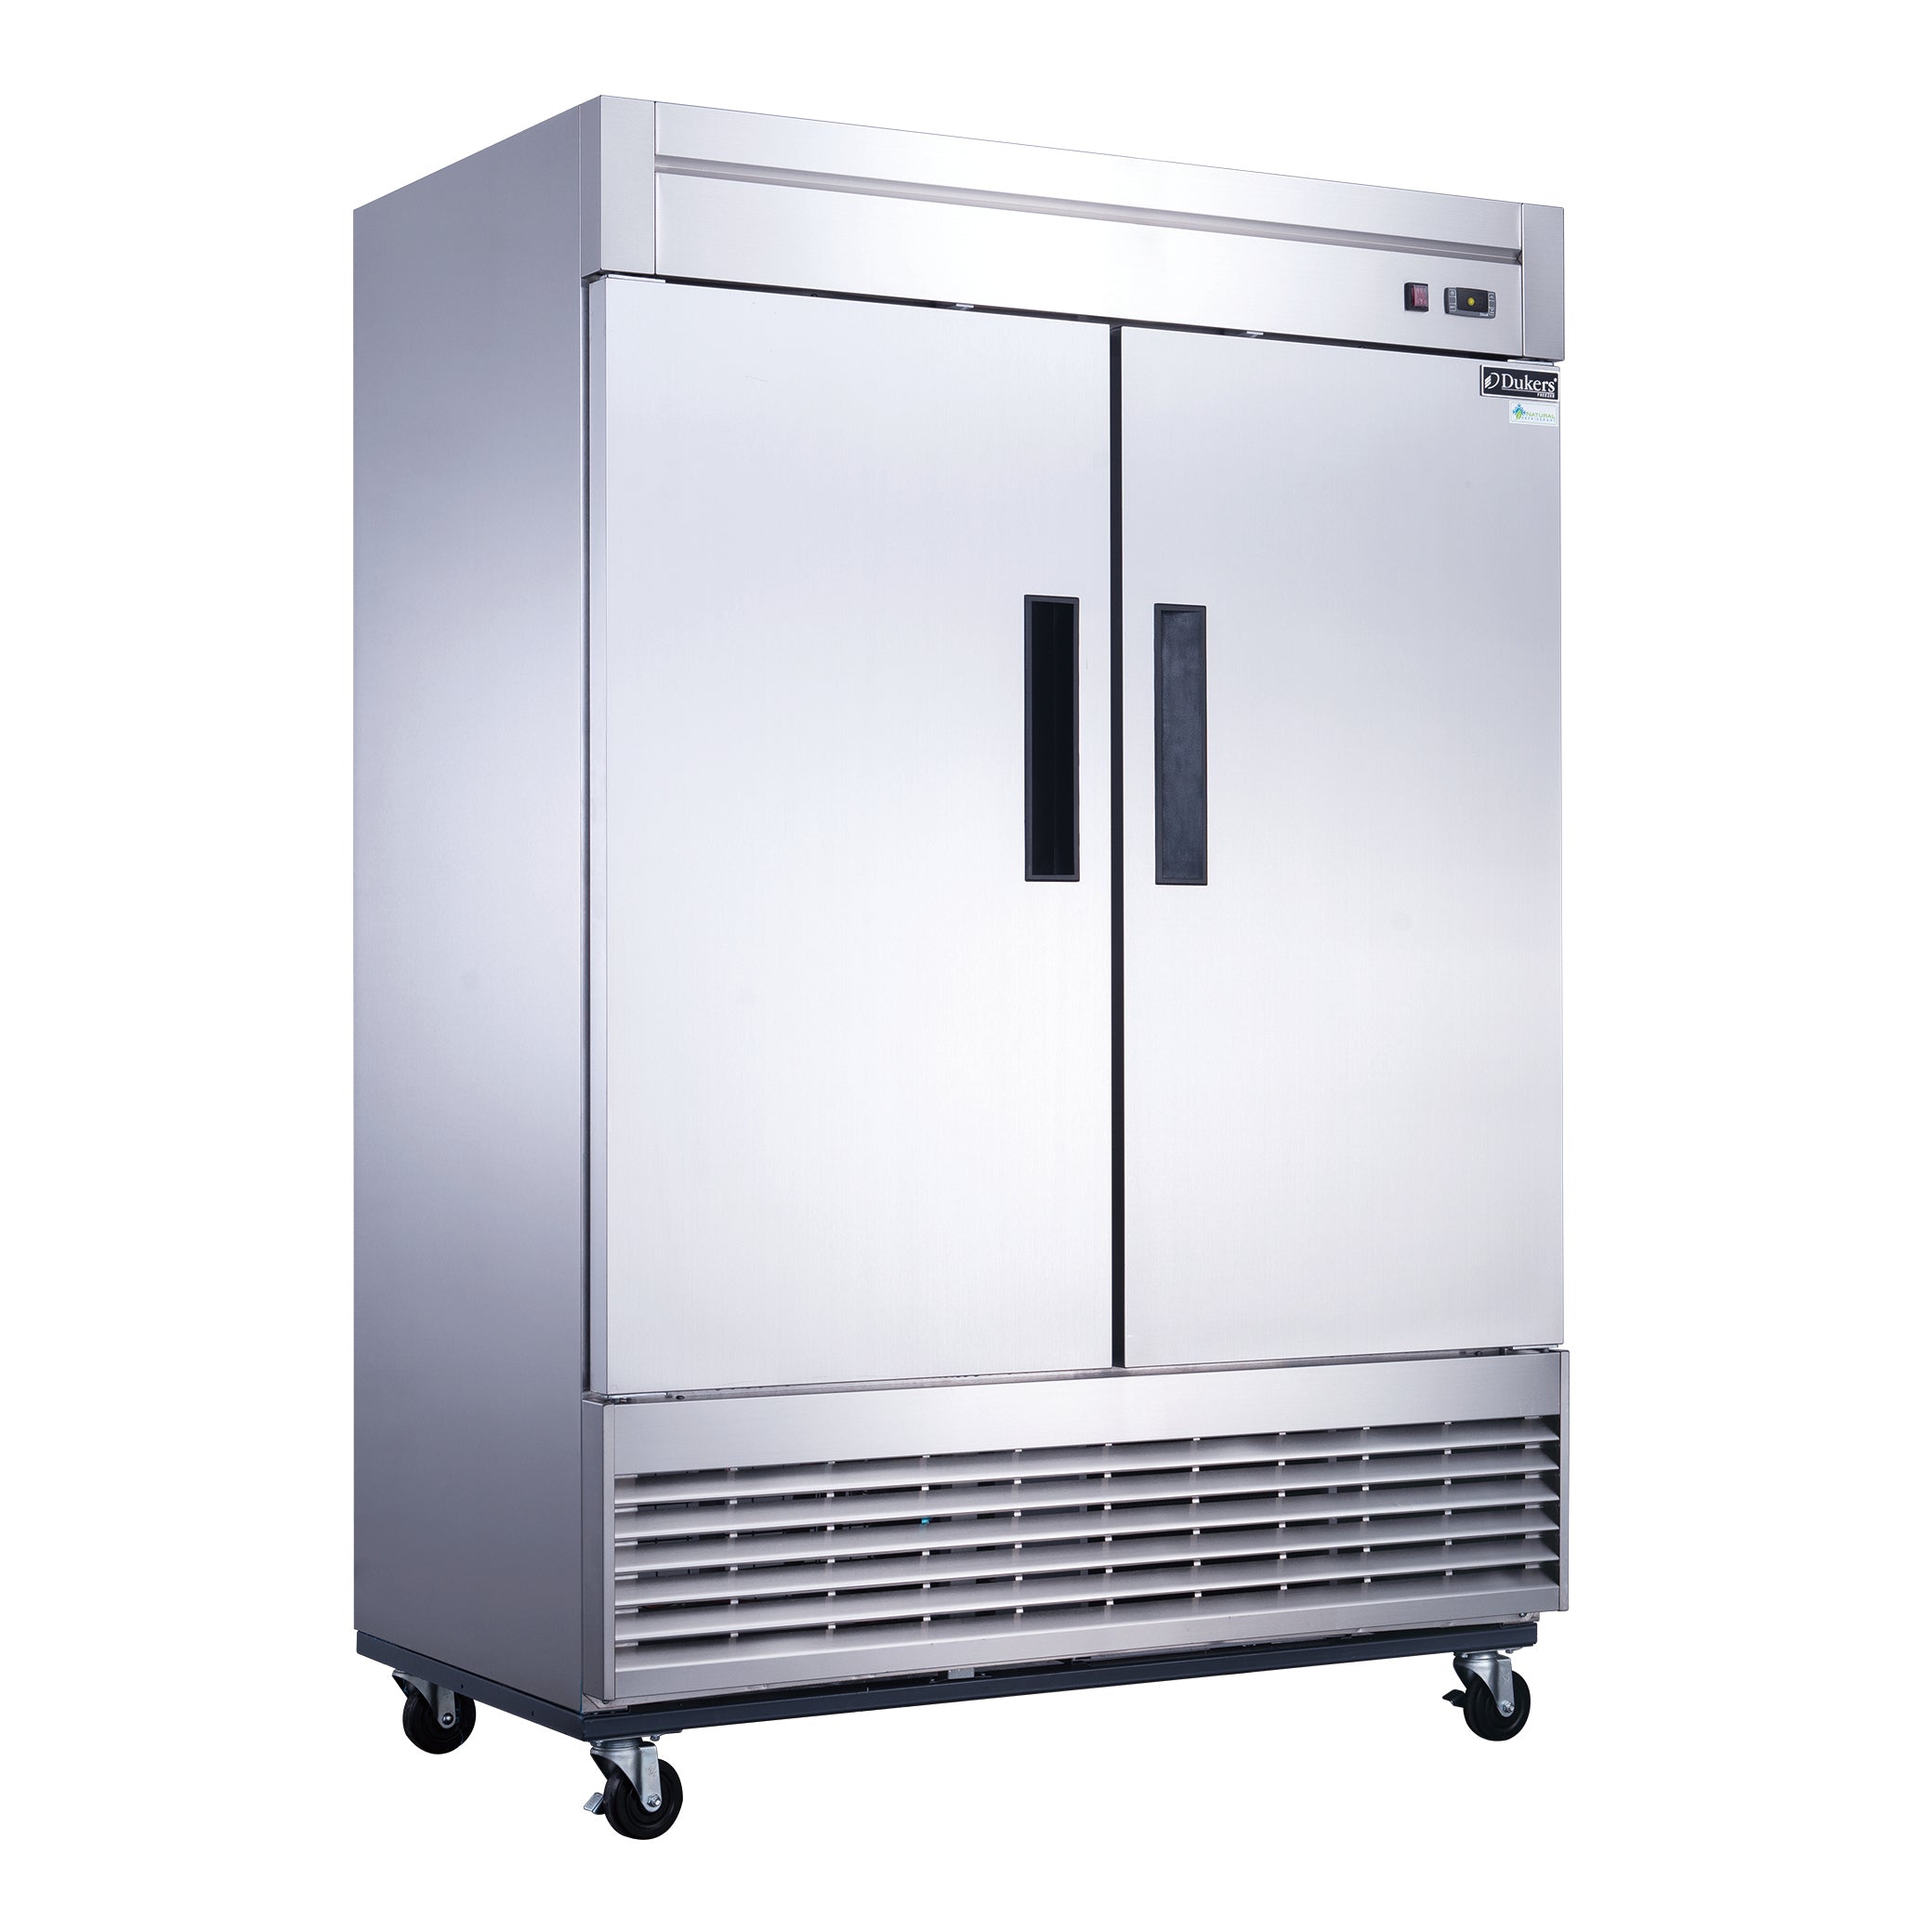 Dukers - D55R, Commercial 55" 2 Solid Door Reach-In Refrigerator Stainless Steel 40.74 cu. ft.